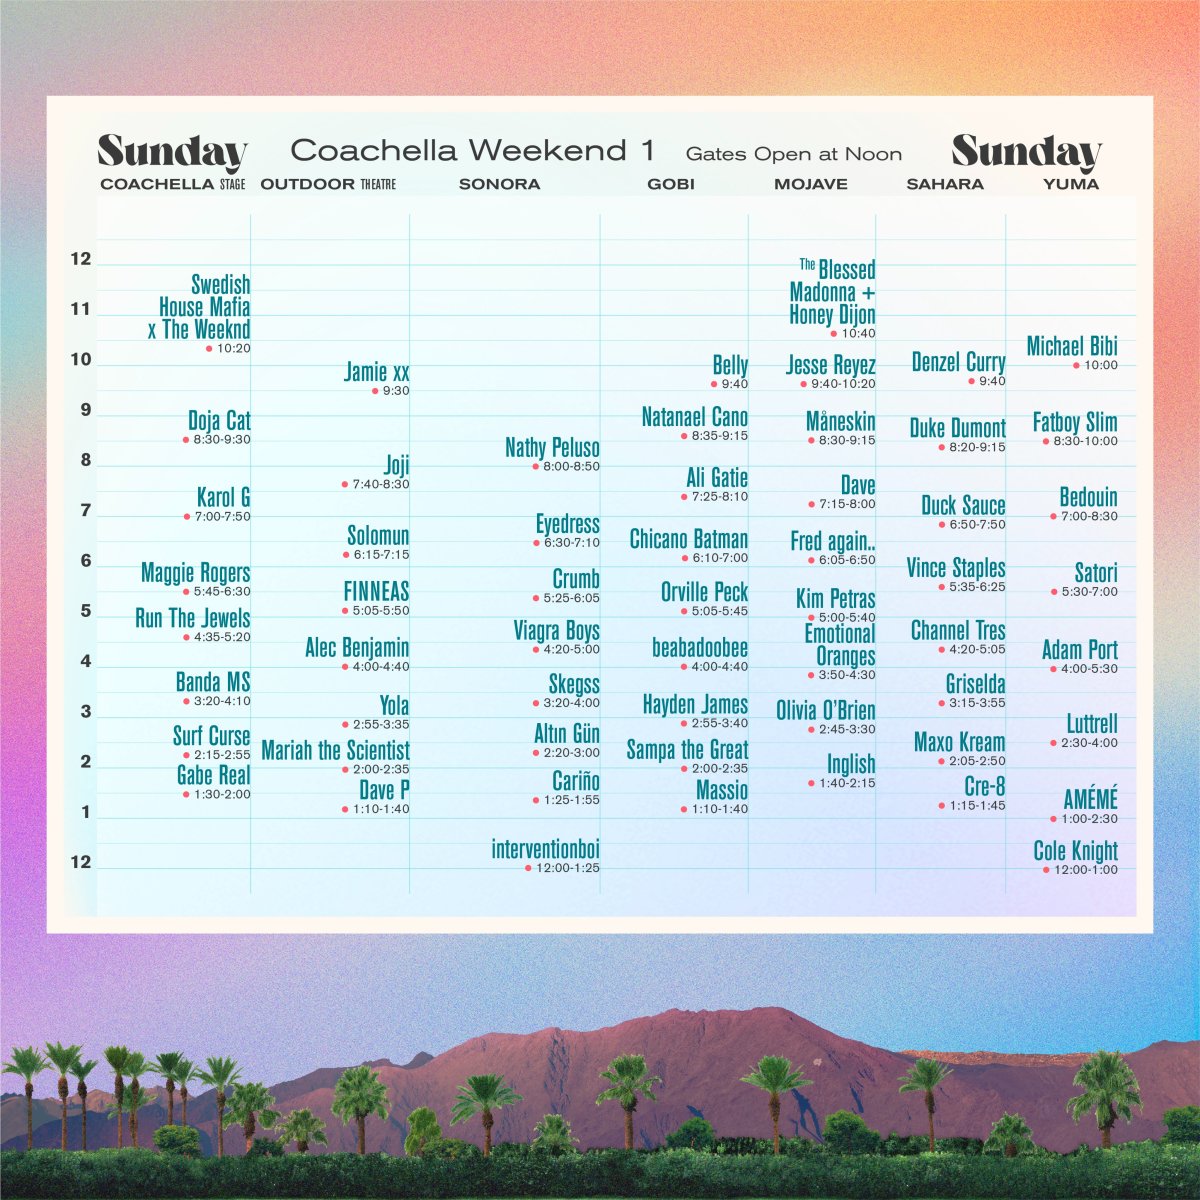 Coachella Weekend 1 set times for Sunday, April 17th.